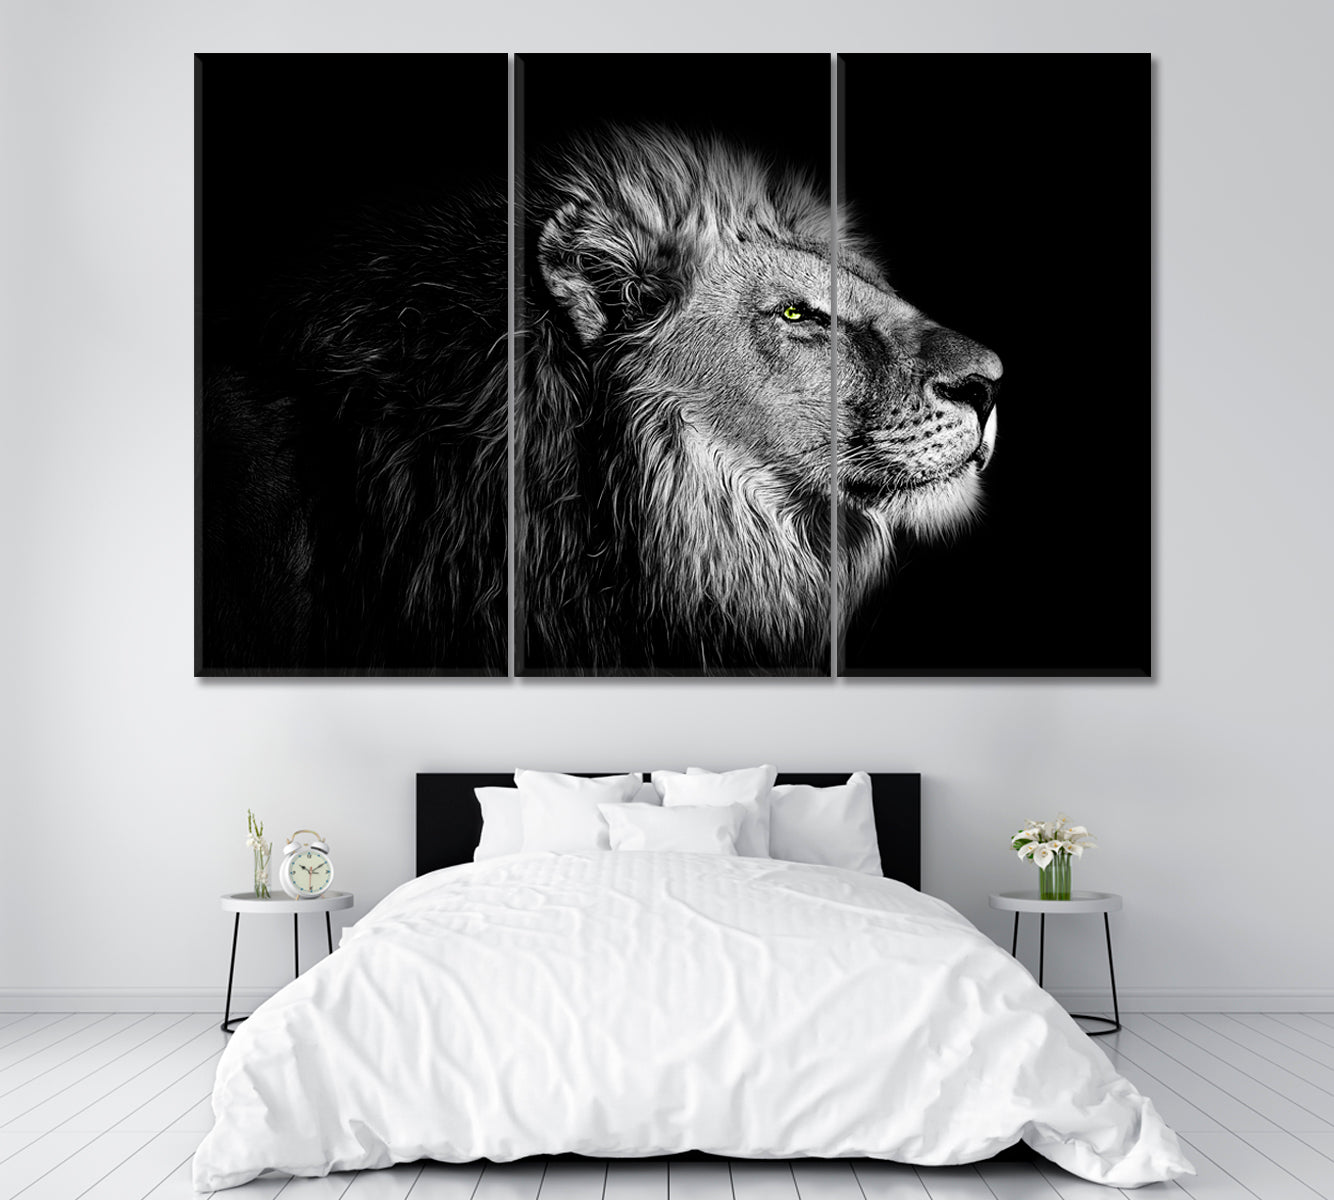 Lion Portrait in Black and White Canvas Print ArtLexy 3 Panels 36"x24" inches 